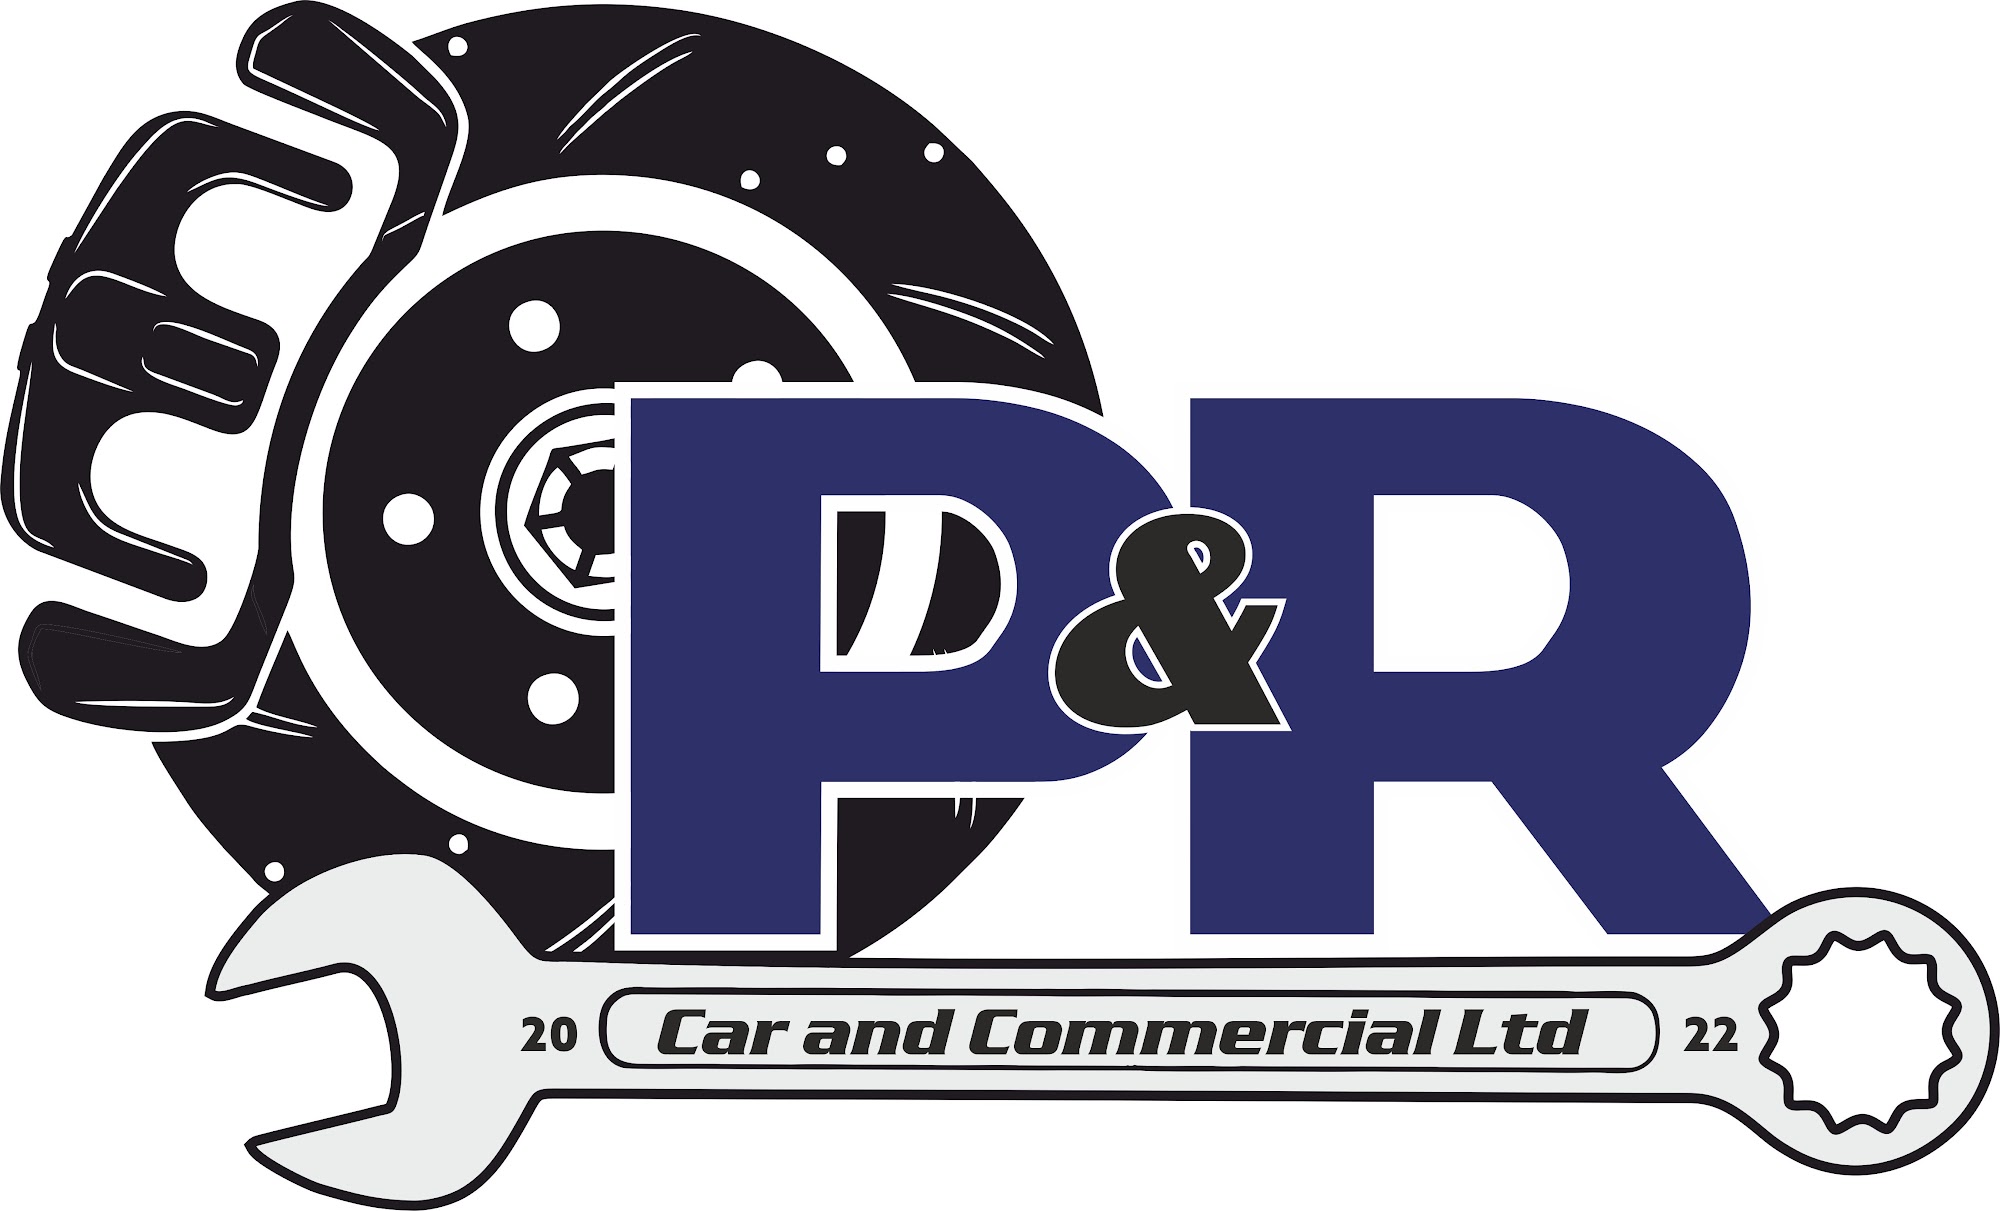 P&R Car and Commercial Ltd